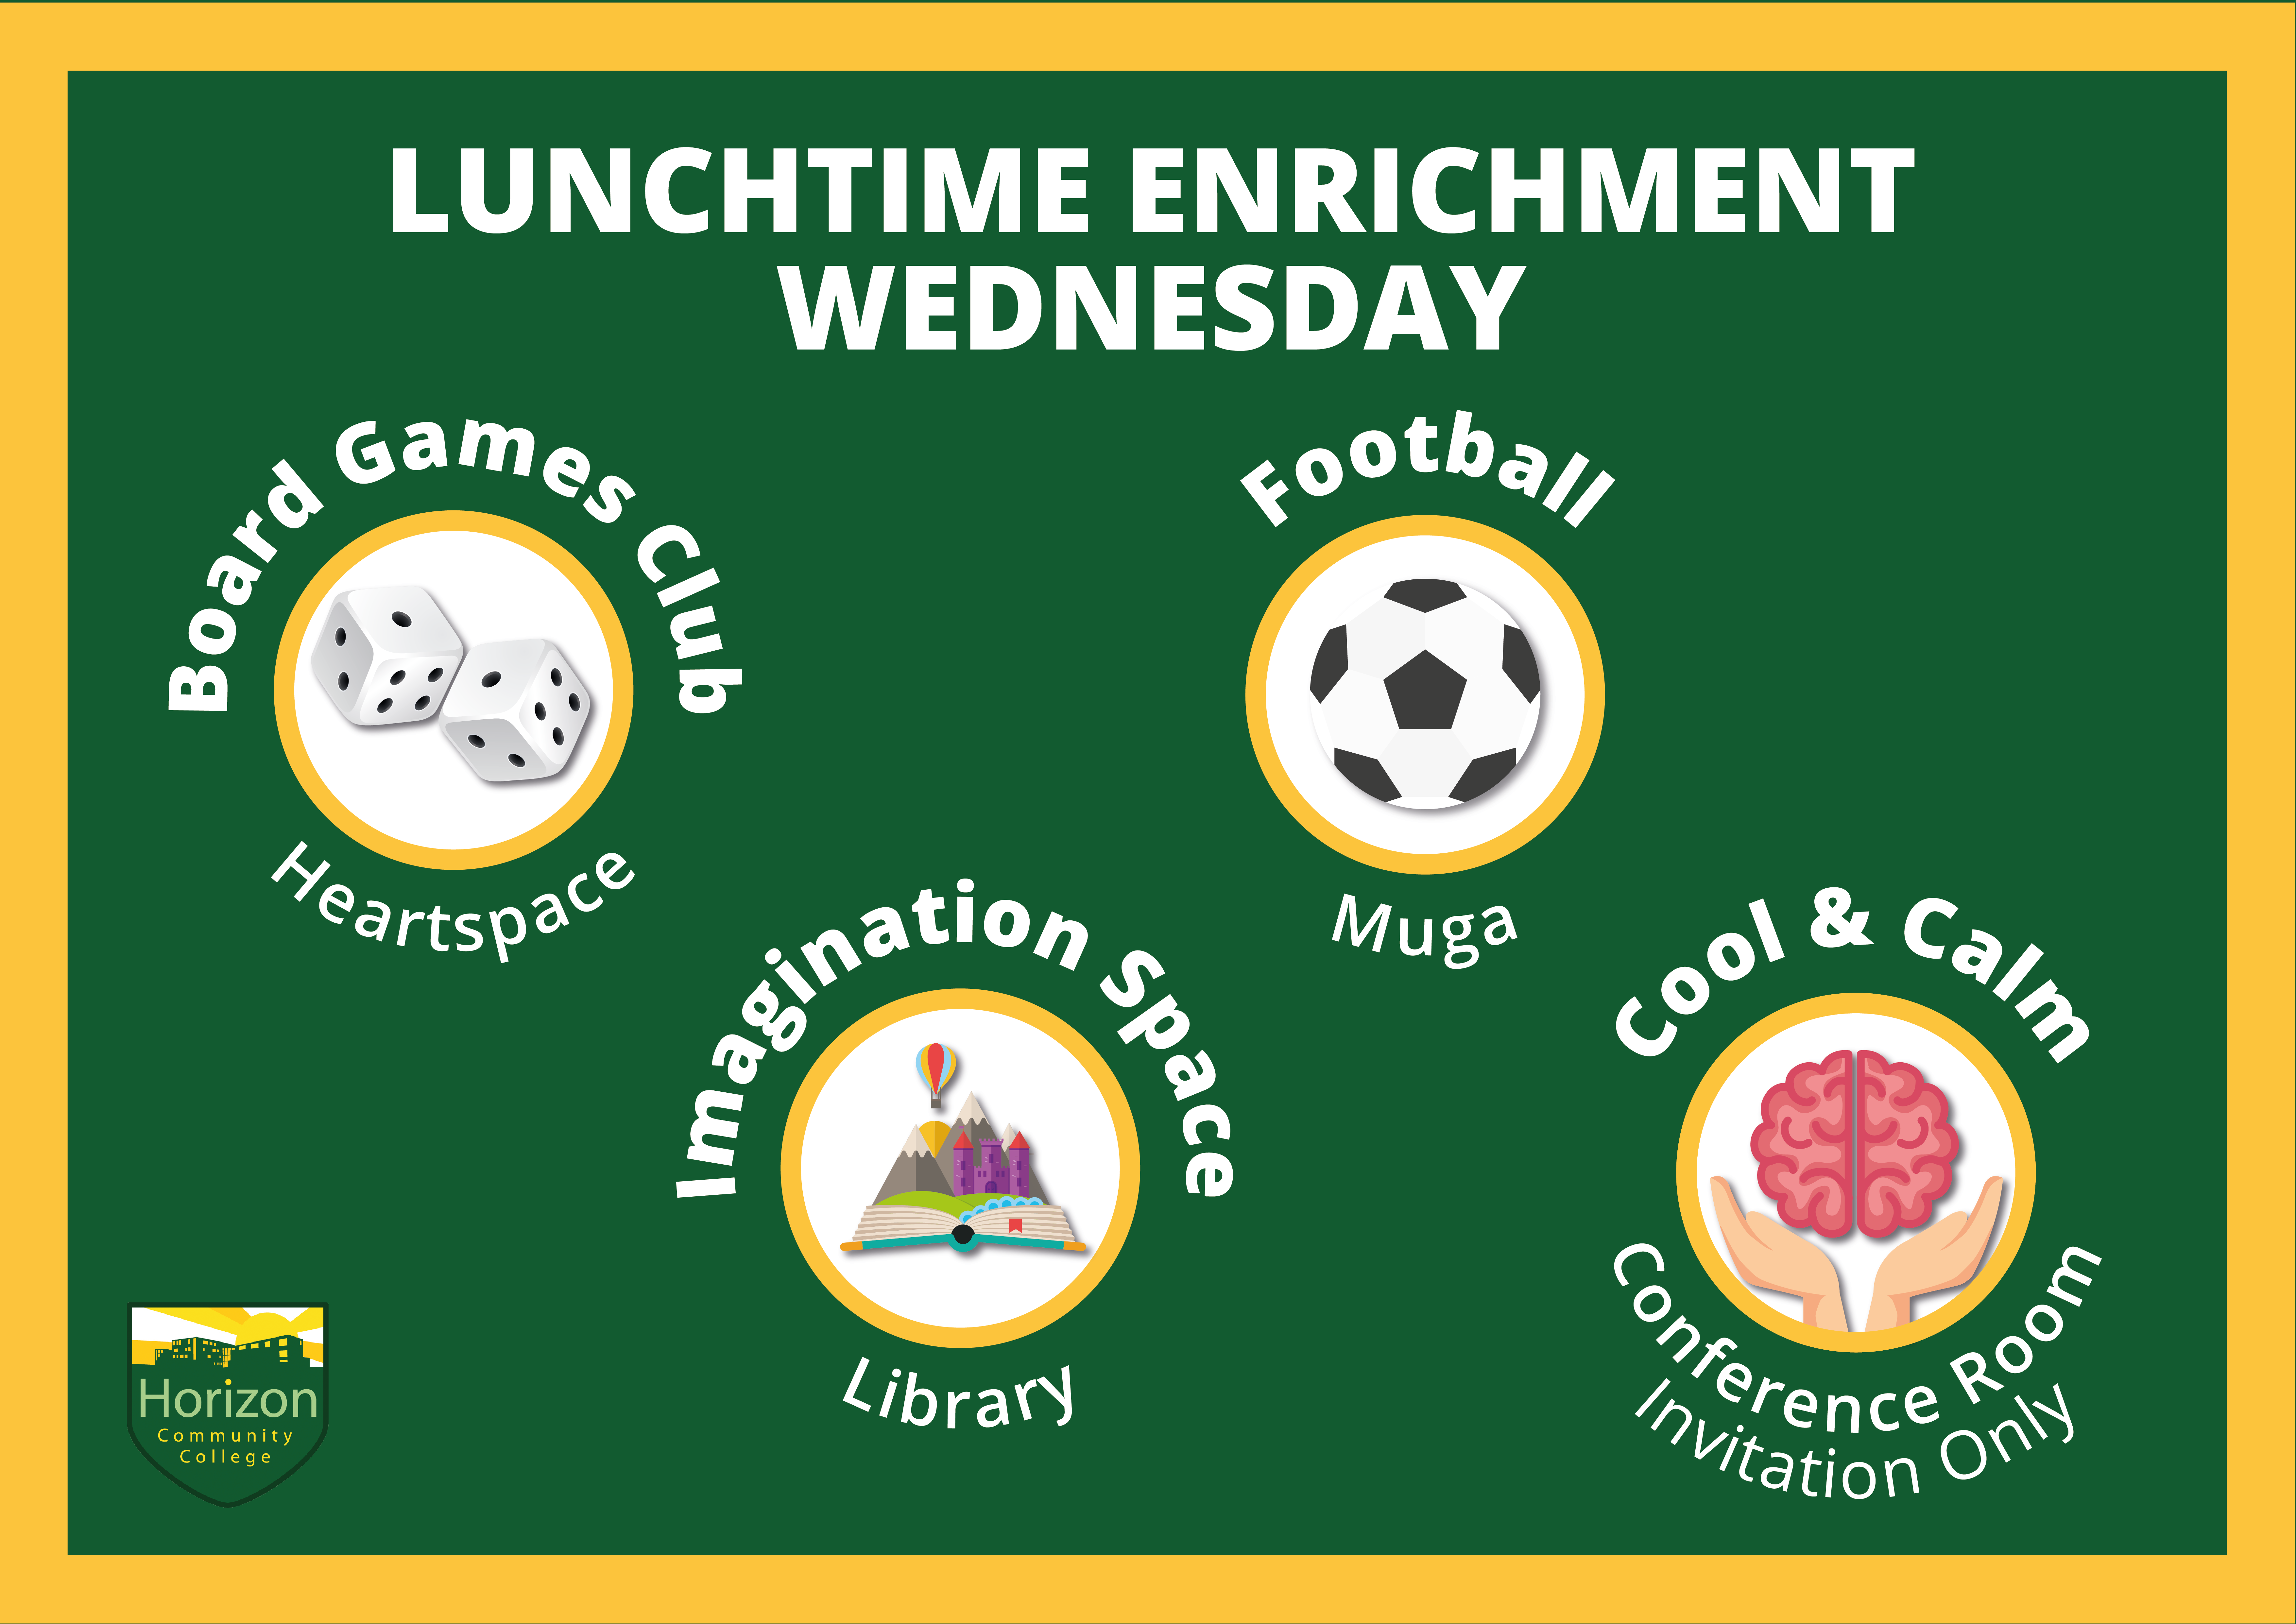 Lunchtime enrichment Wednesday